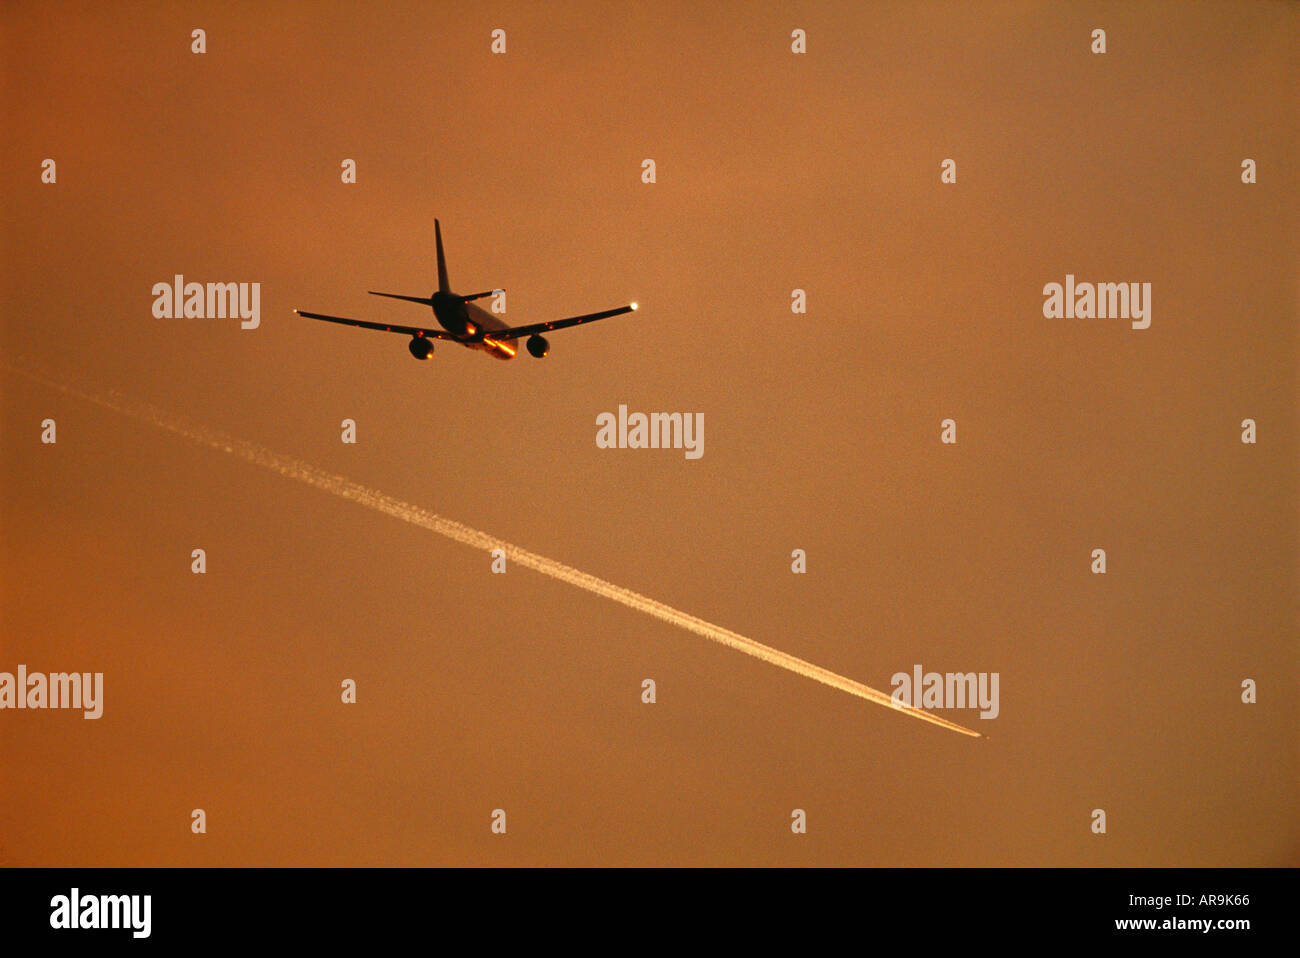 Boeing 757 jet airliner flying at cruising altitude and a contrail vapour trail at dusk sunset sunrise golden orange sky Stock Photo